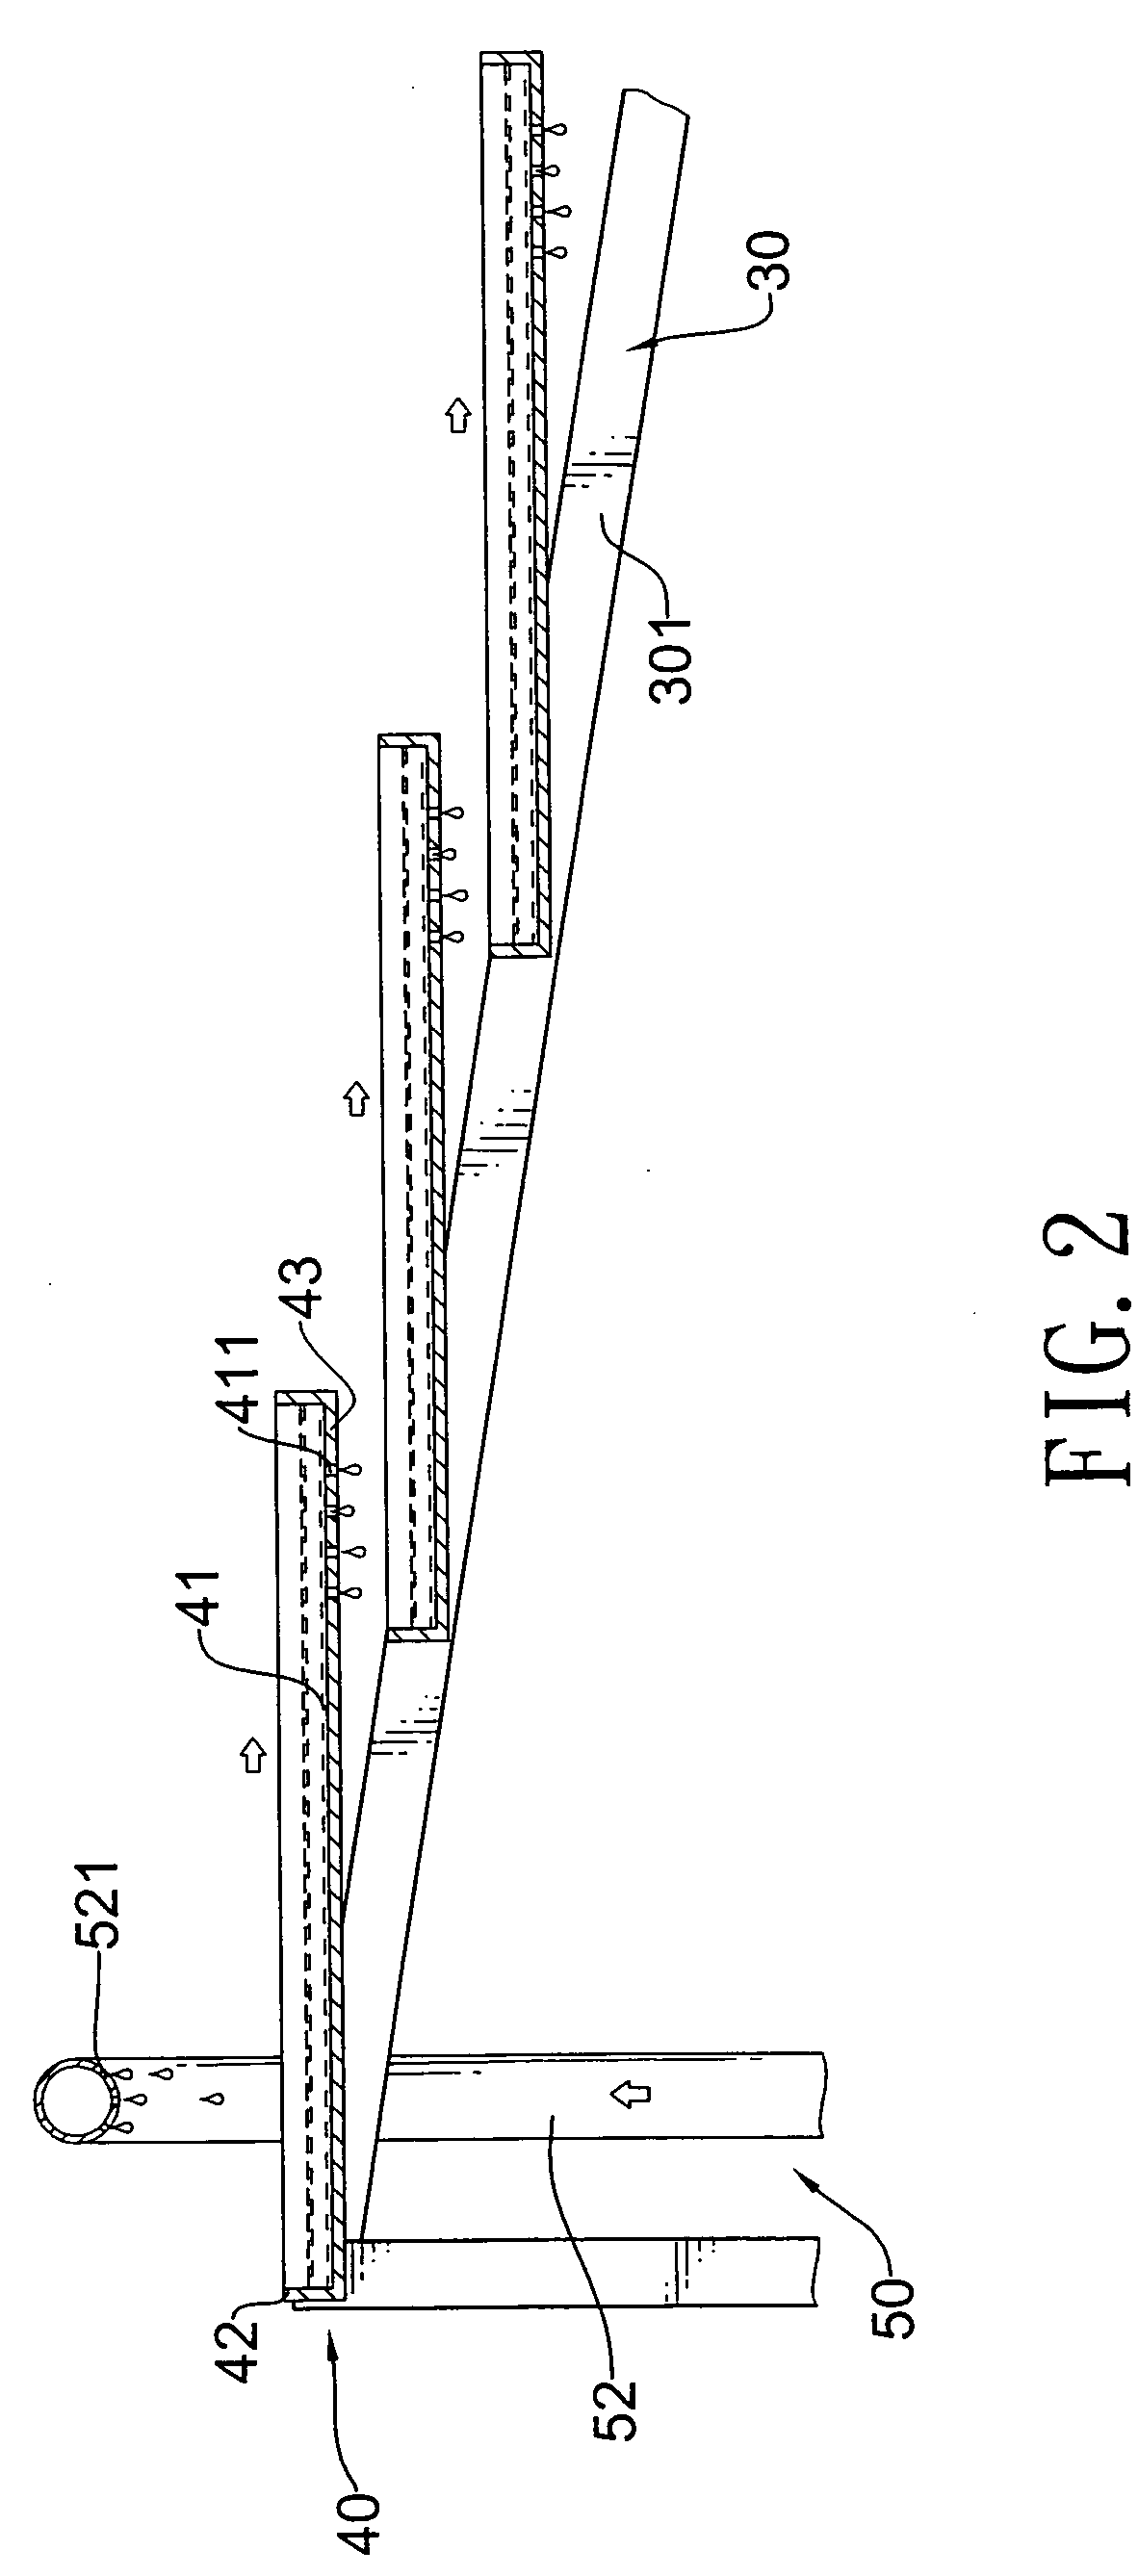 Apparatus for carbon dioxide-capture system and use of the same